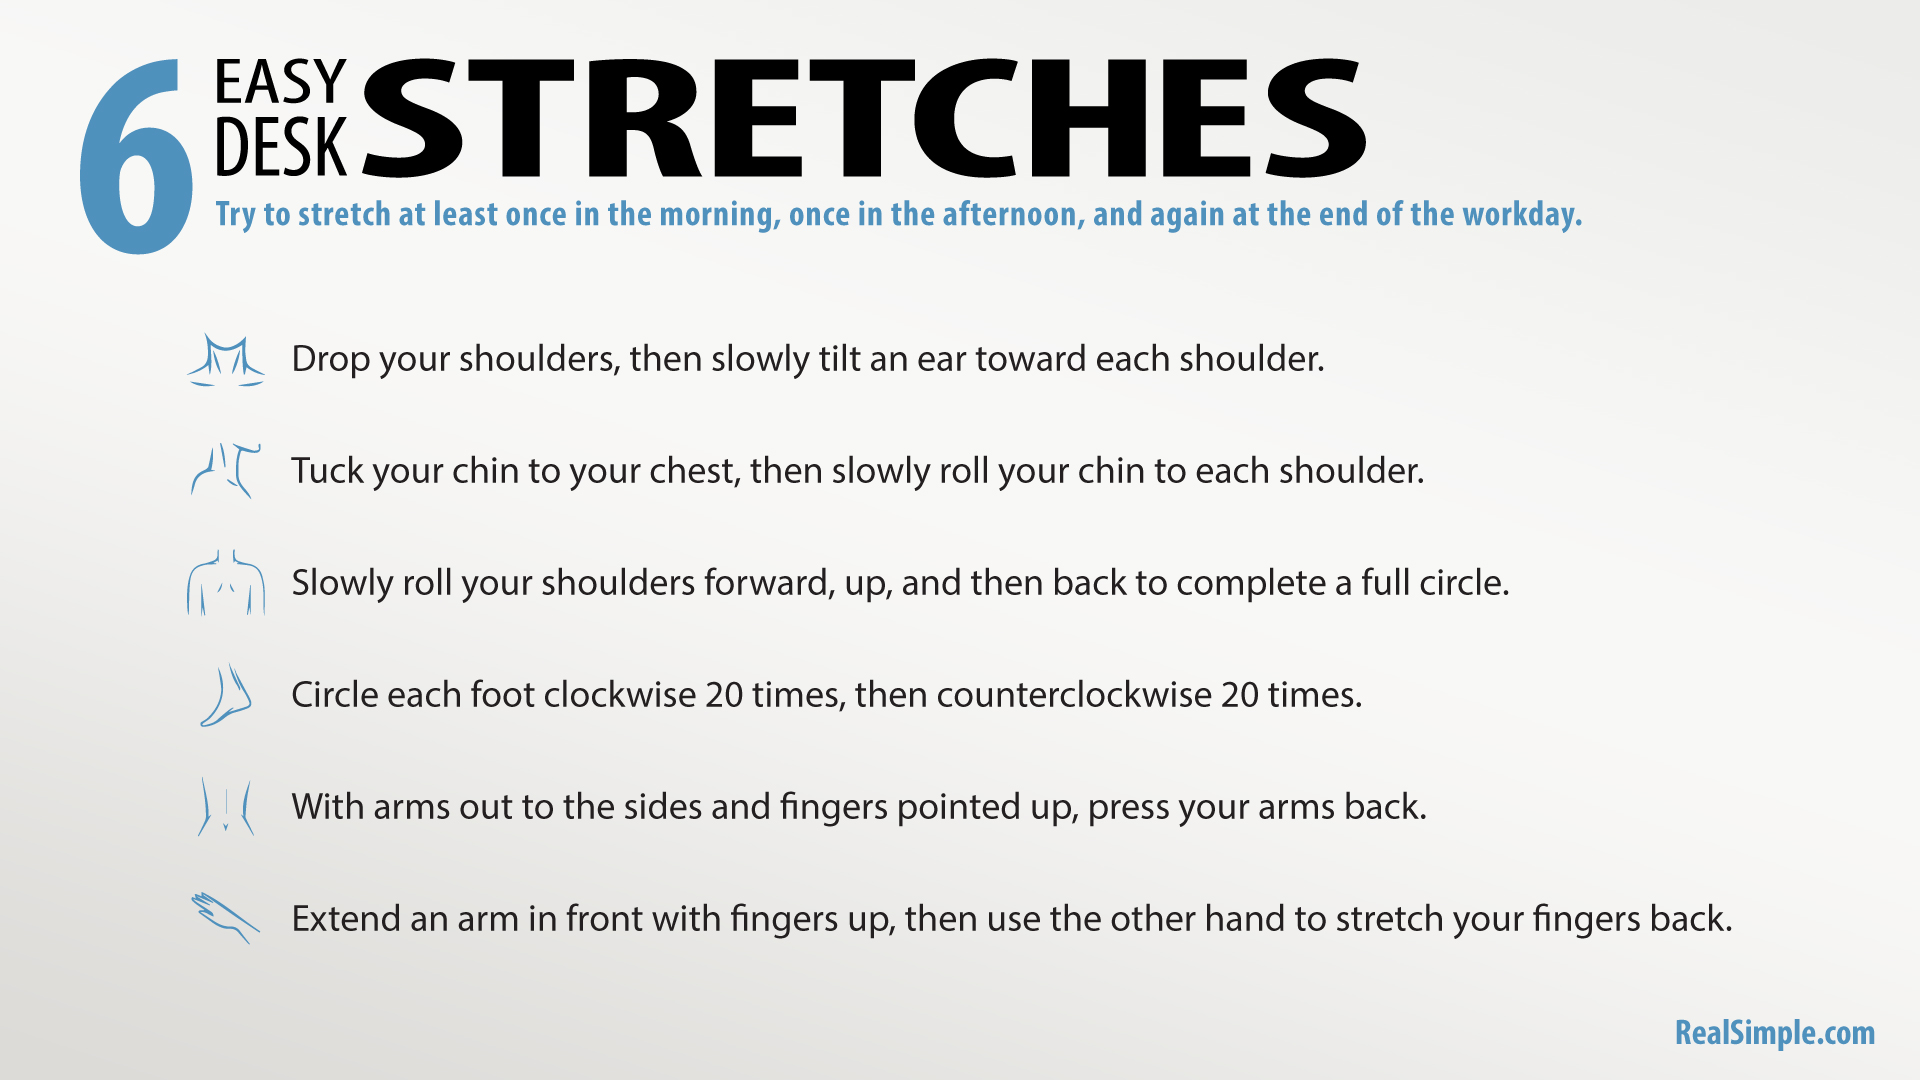 Free Graphic | Easy Desk Stretches | 6 Easy Moves